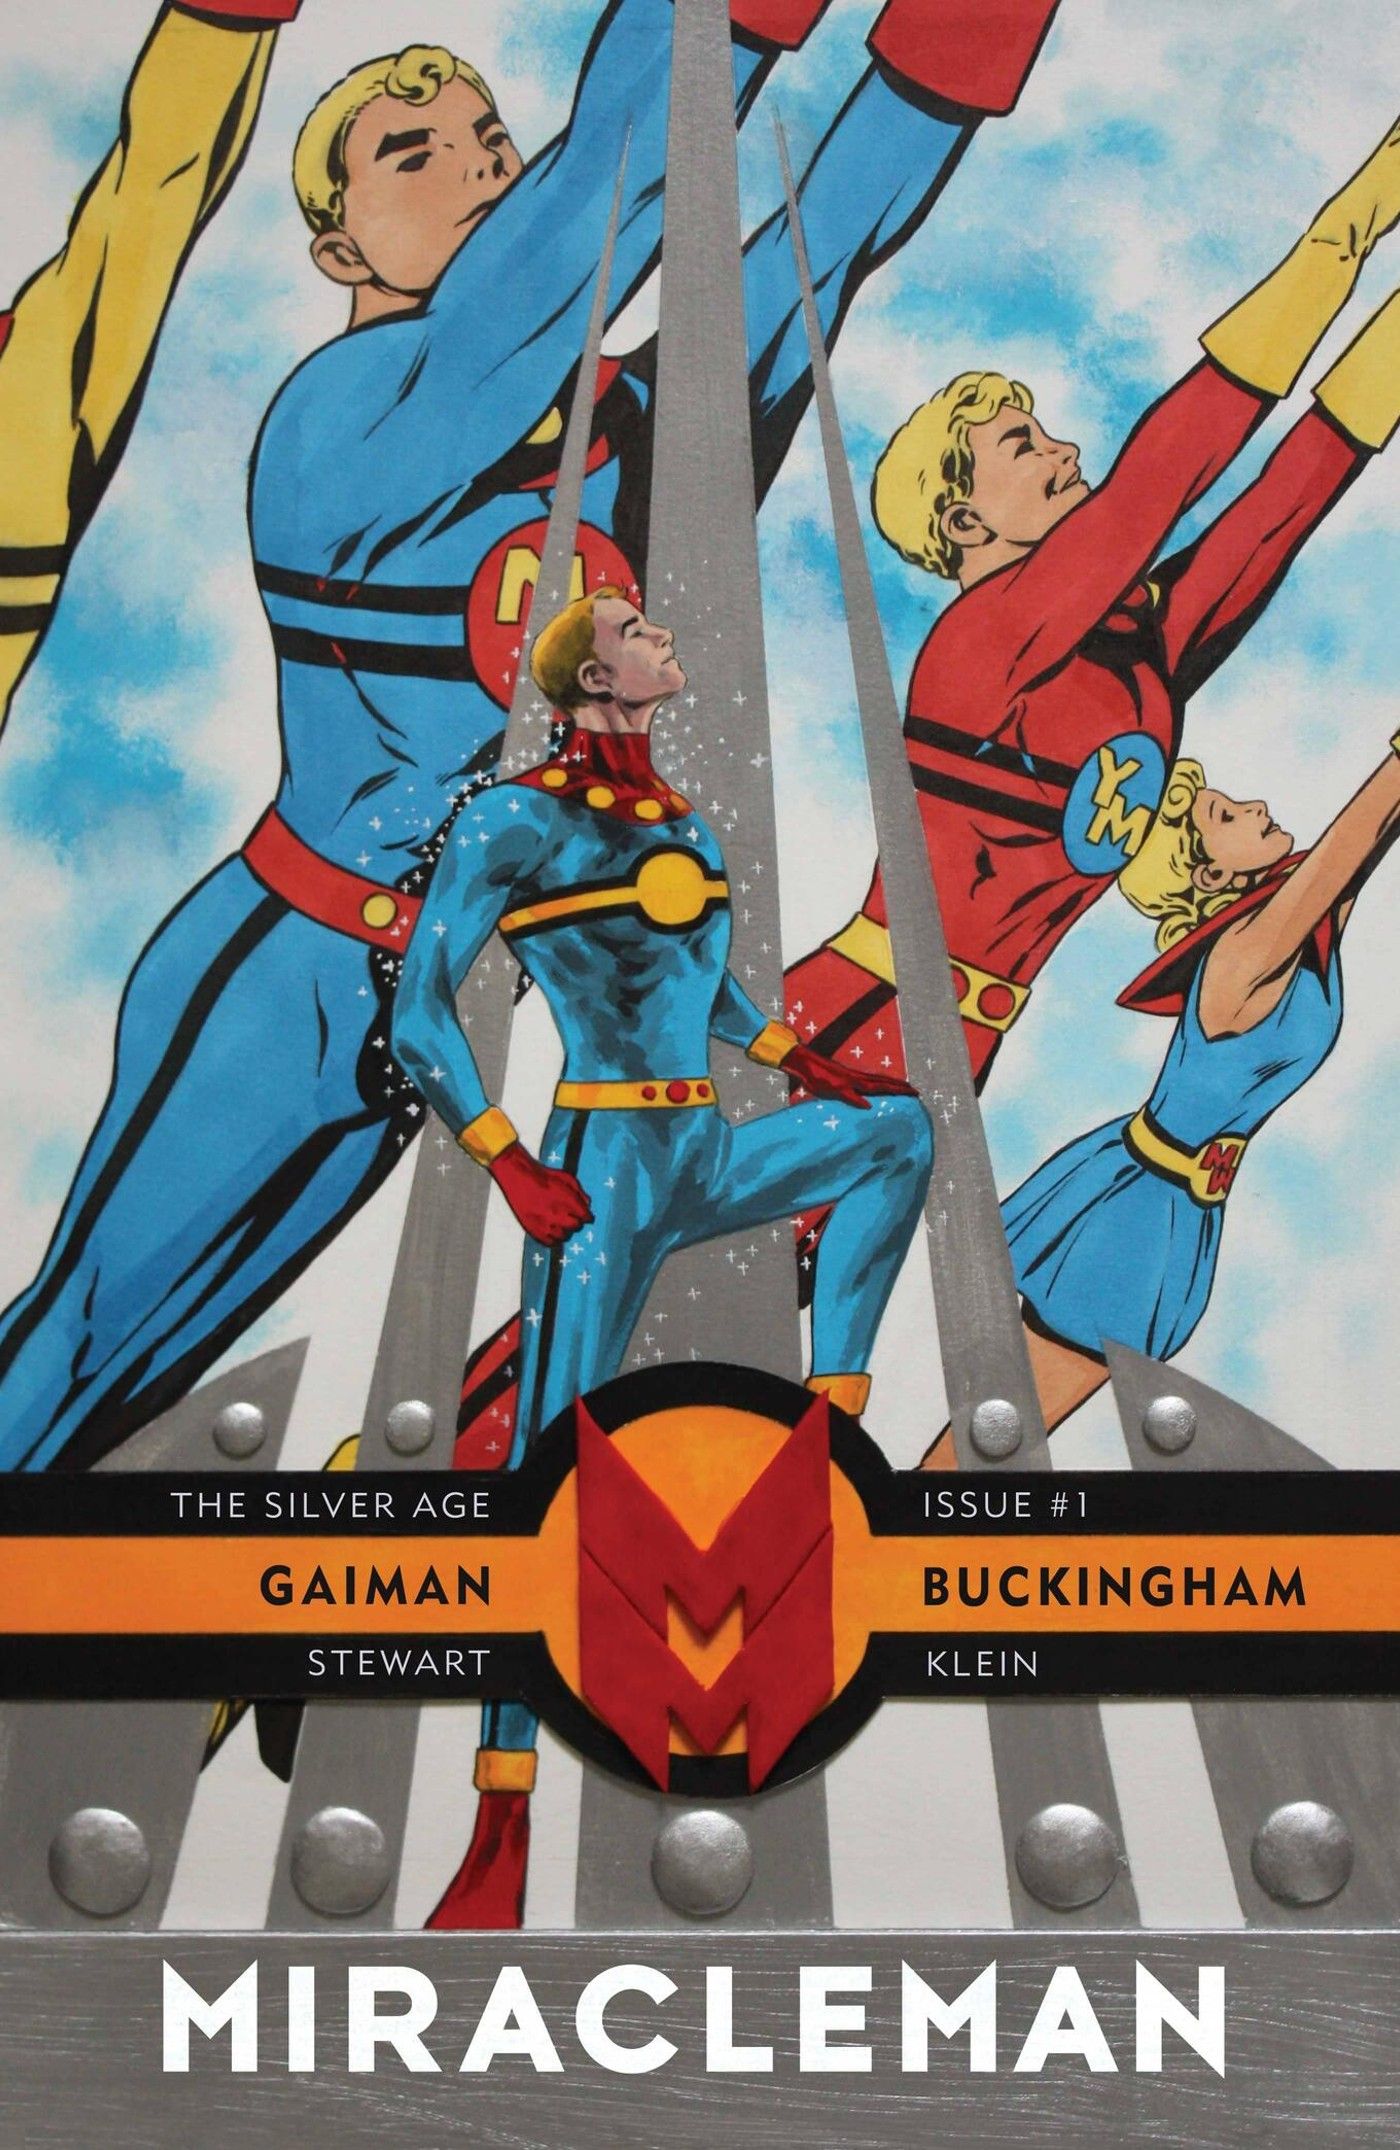 Marvel’s New Miracleman Completes Comics’ Great Unfinished Epic